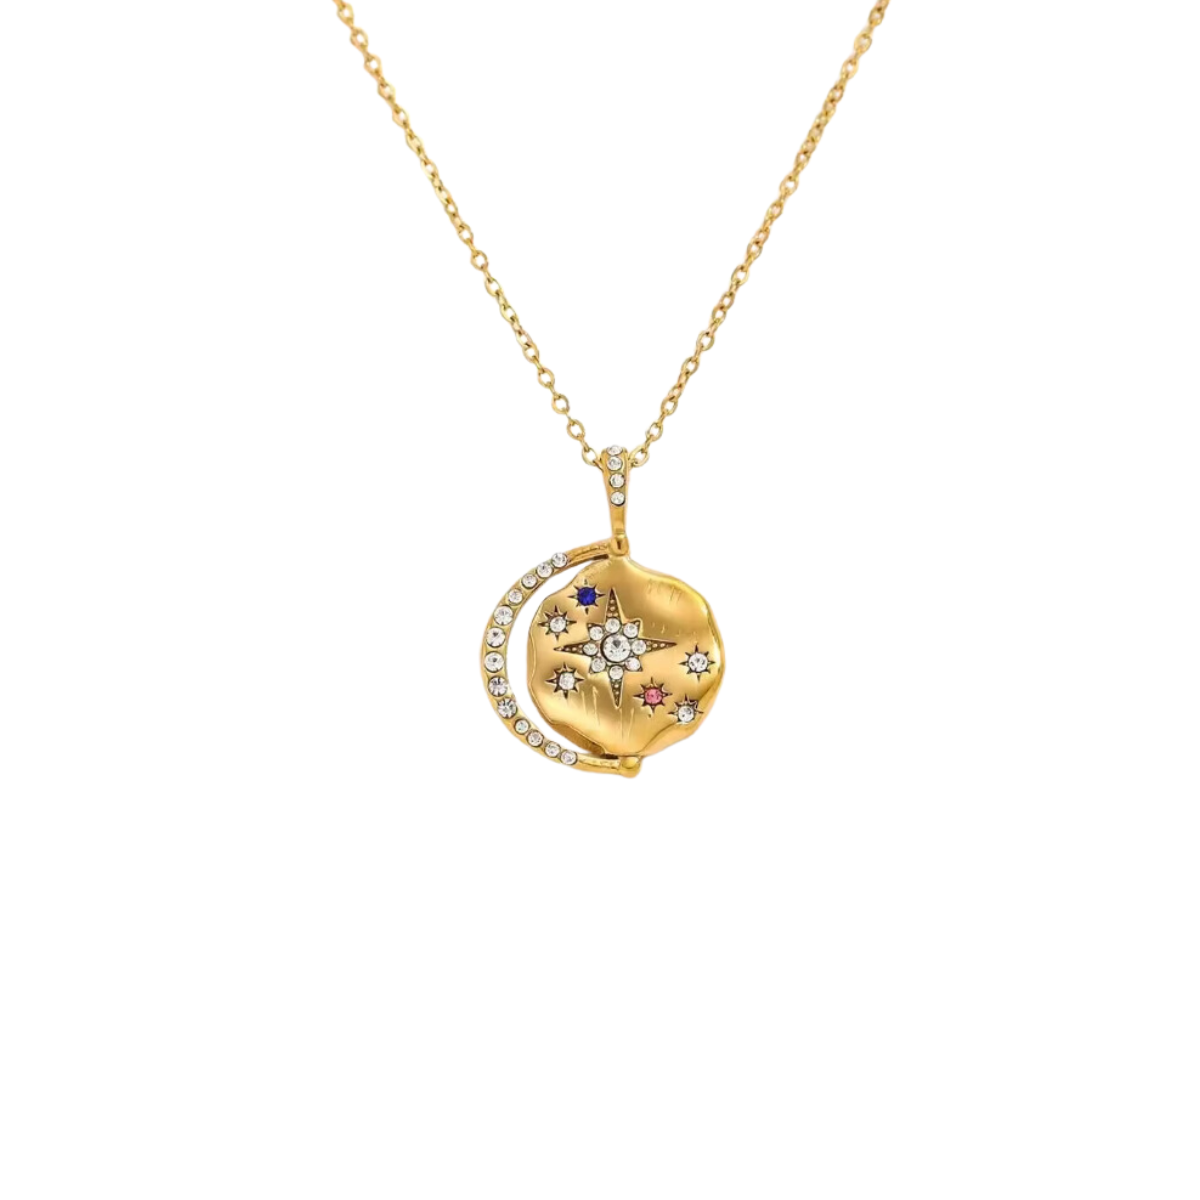 The Solstice 18k Gold Plated Necklace